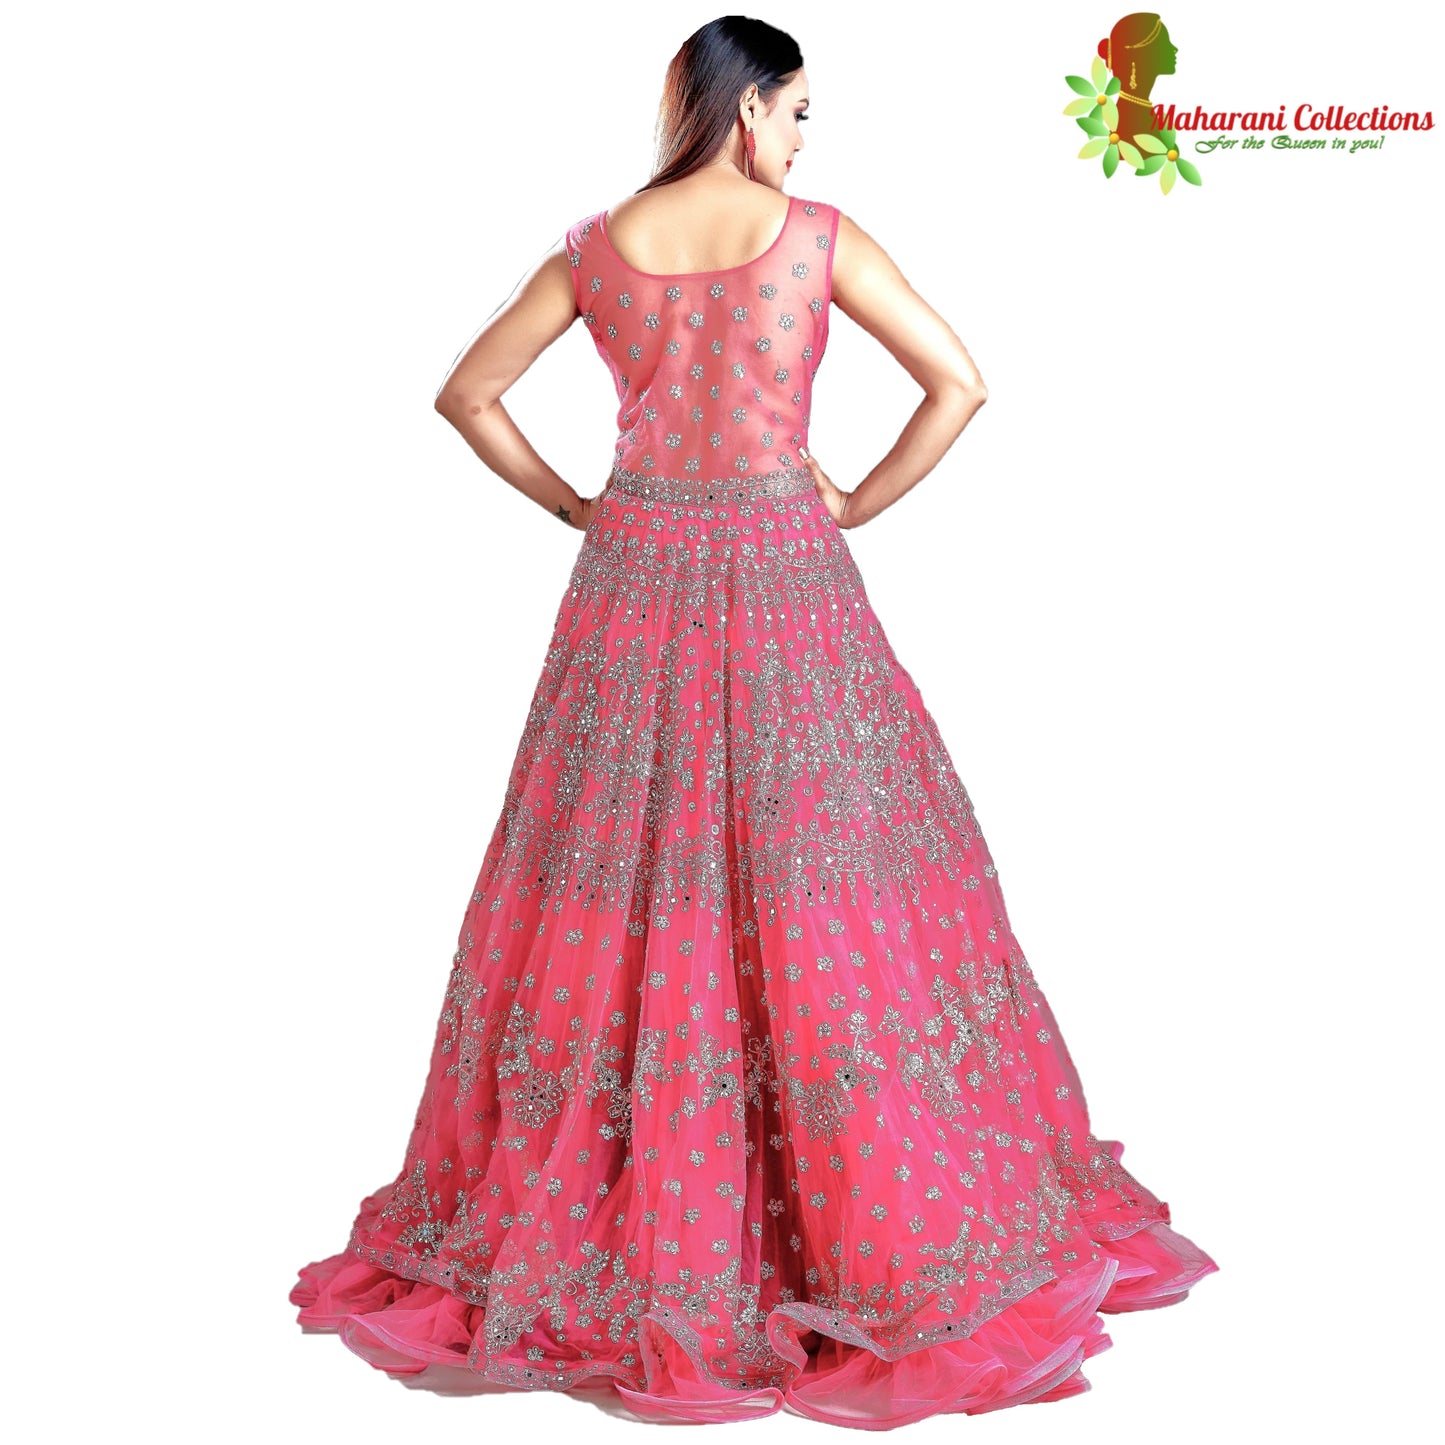 Maharani's Designer Ball (Princess) Gown - Solid Pink with Net, Beads, Sequins and Thread Work